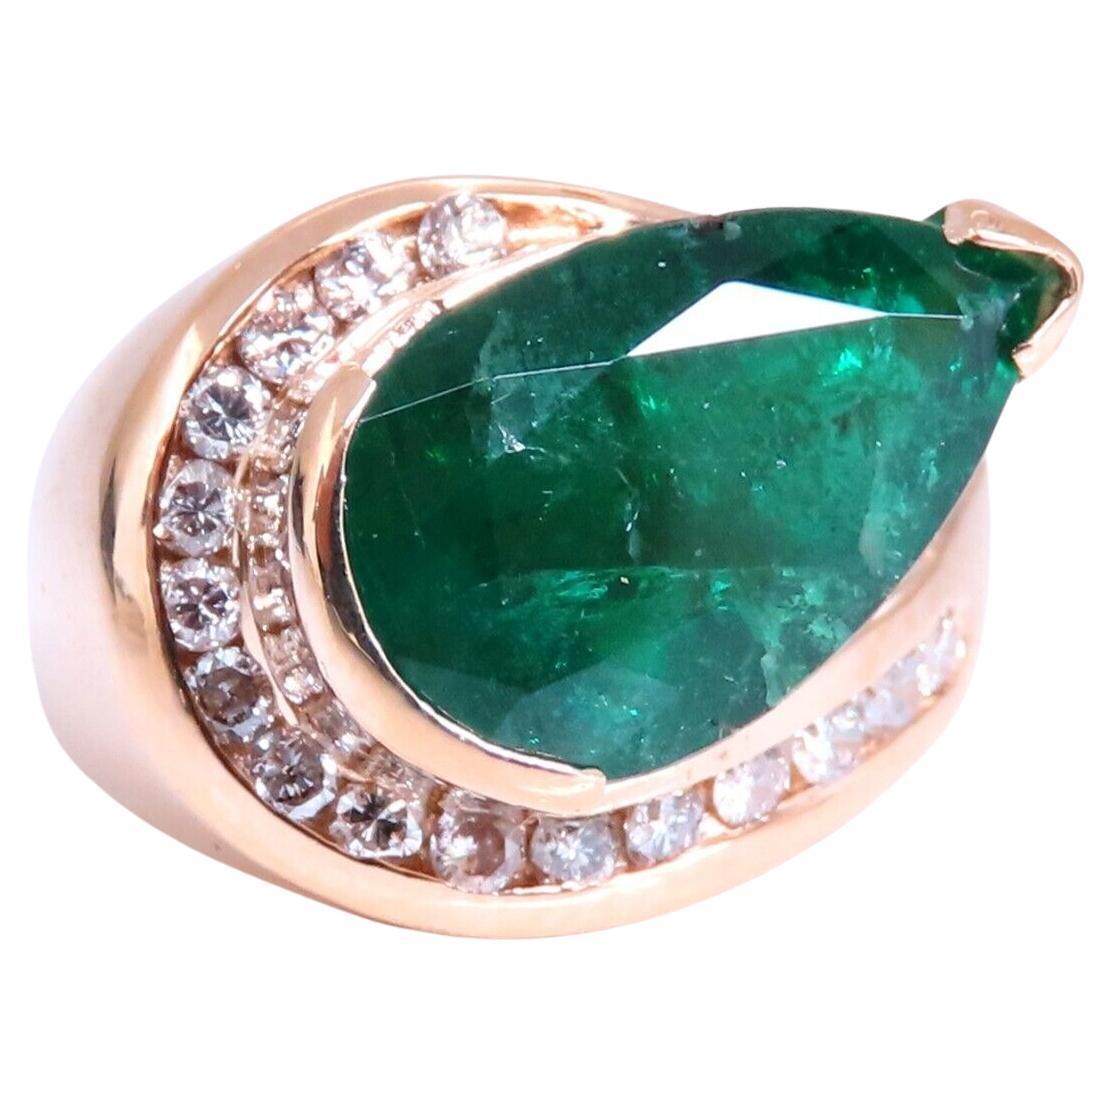 5.10ct Natural Emerald Diamond Ring 14kt Gold For Sale